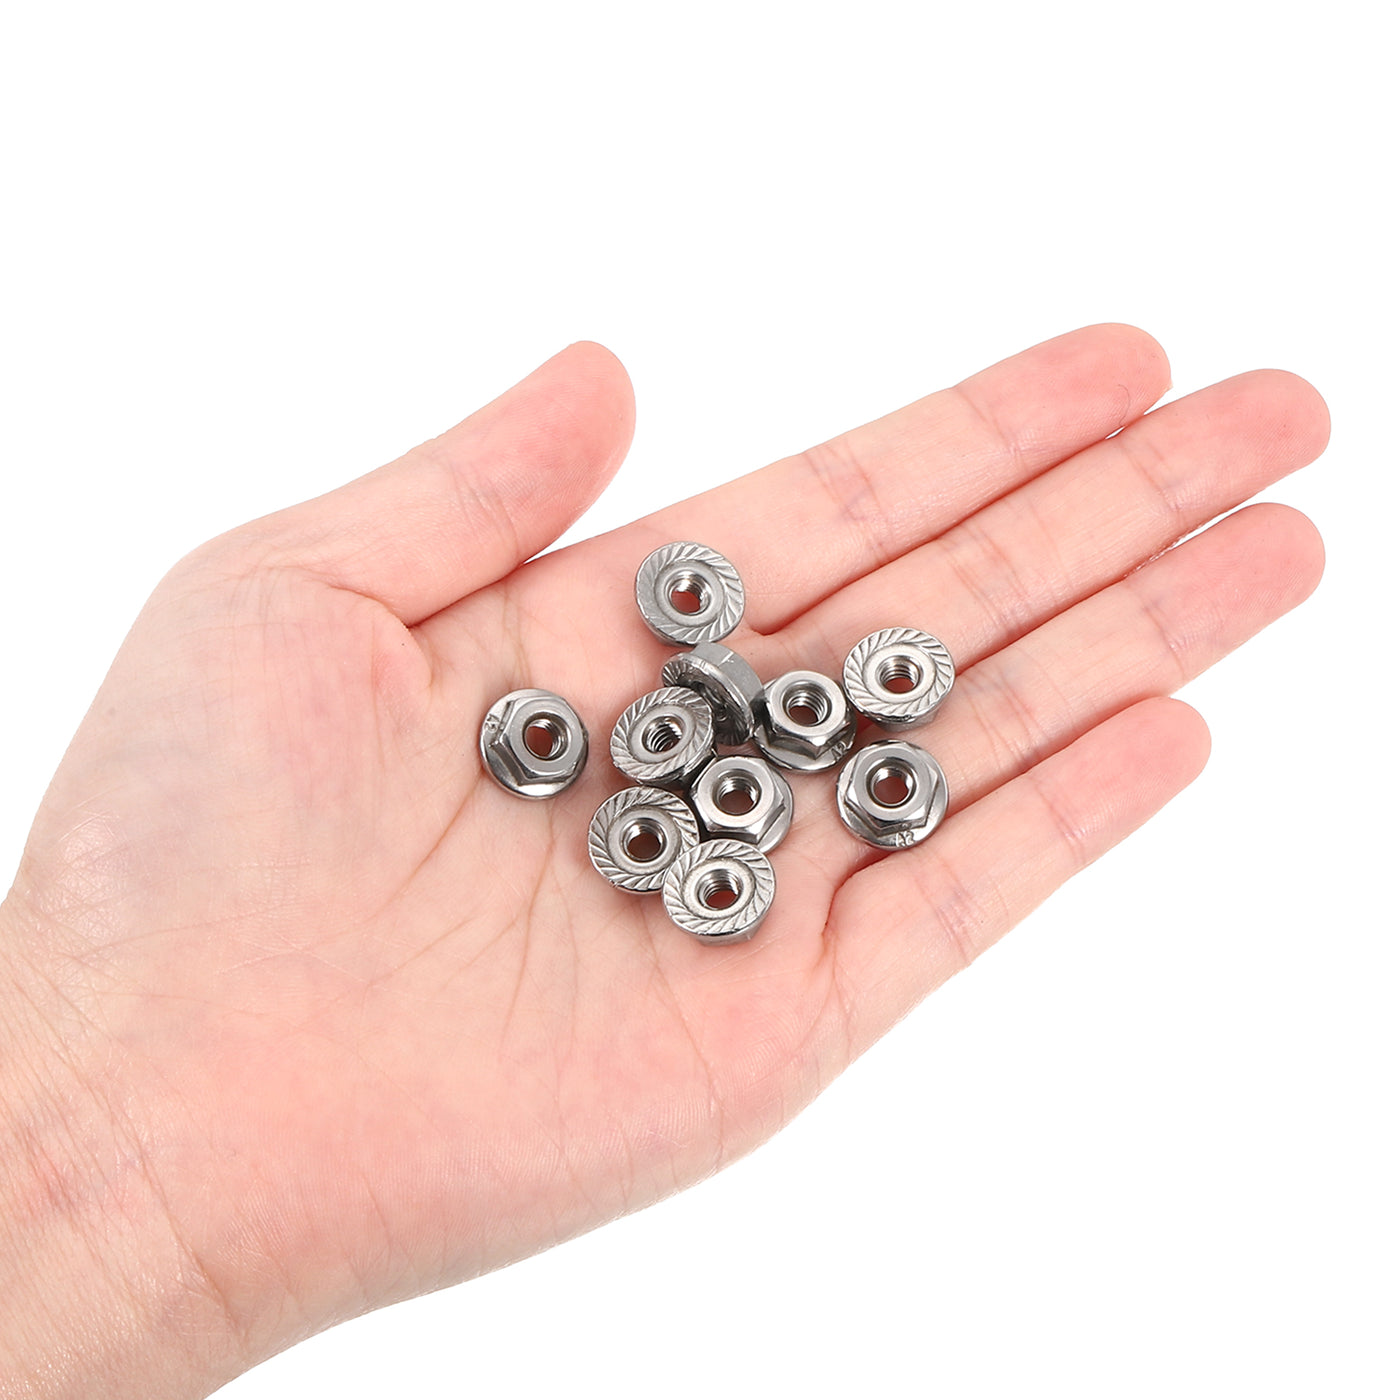 uxcell Uxcell 5/16-18 Serrated Flange Hex Lock Nuts, 25Pcs Hexagon Flange Nut, Silver